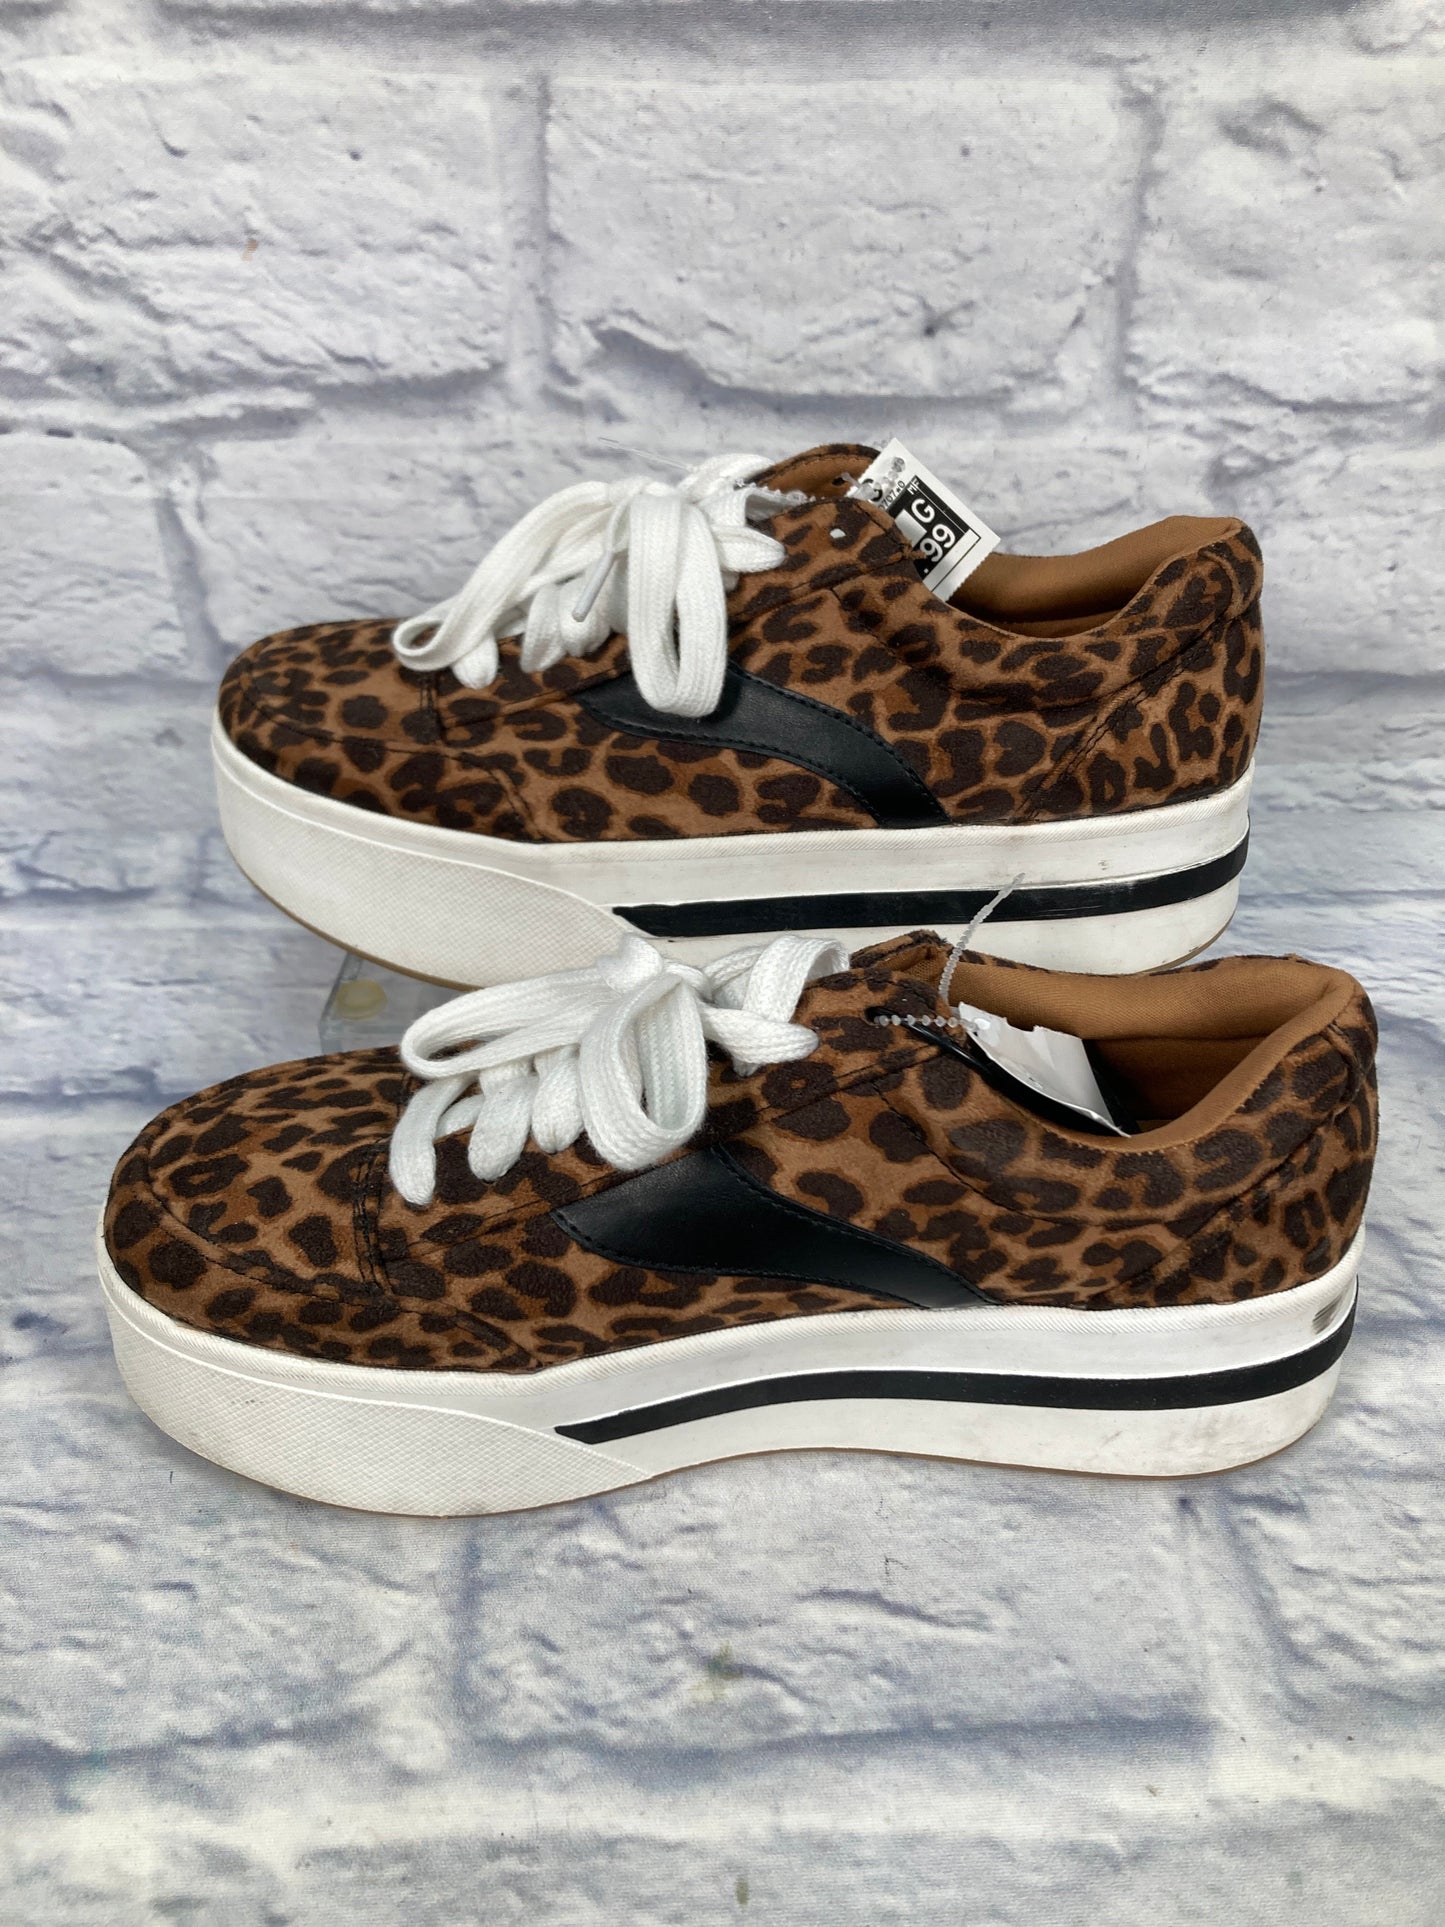 Animal Print Shoes Sneakers Platform Clothes Mentor, Size 8